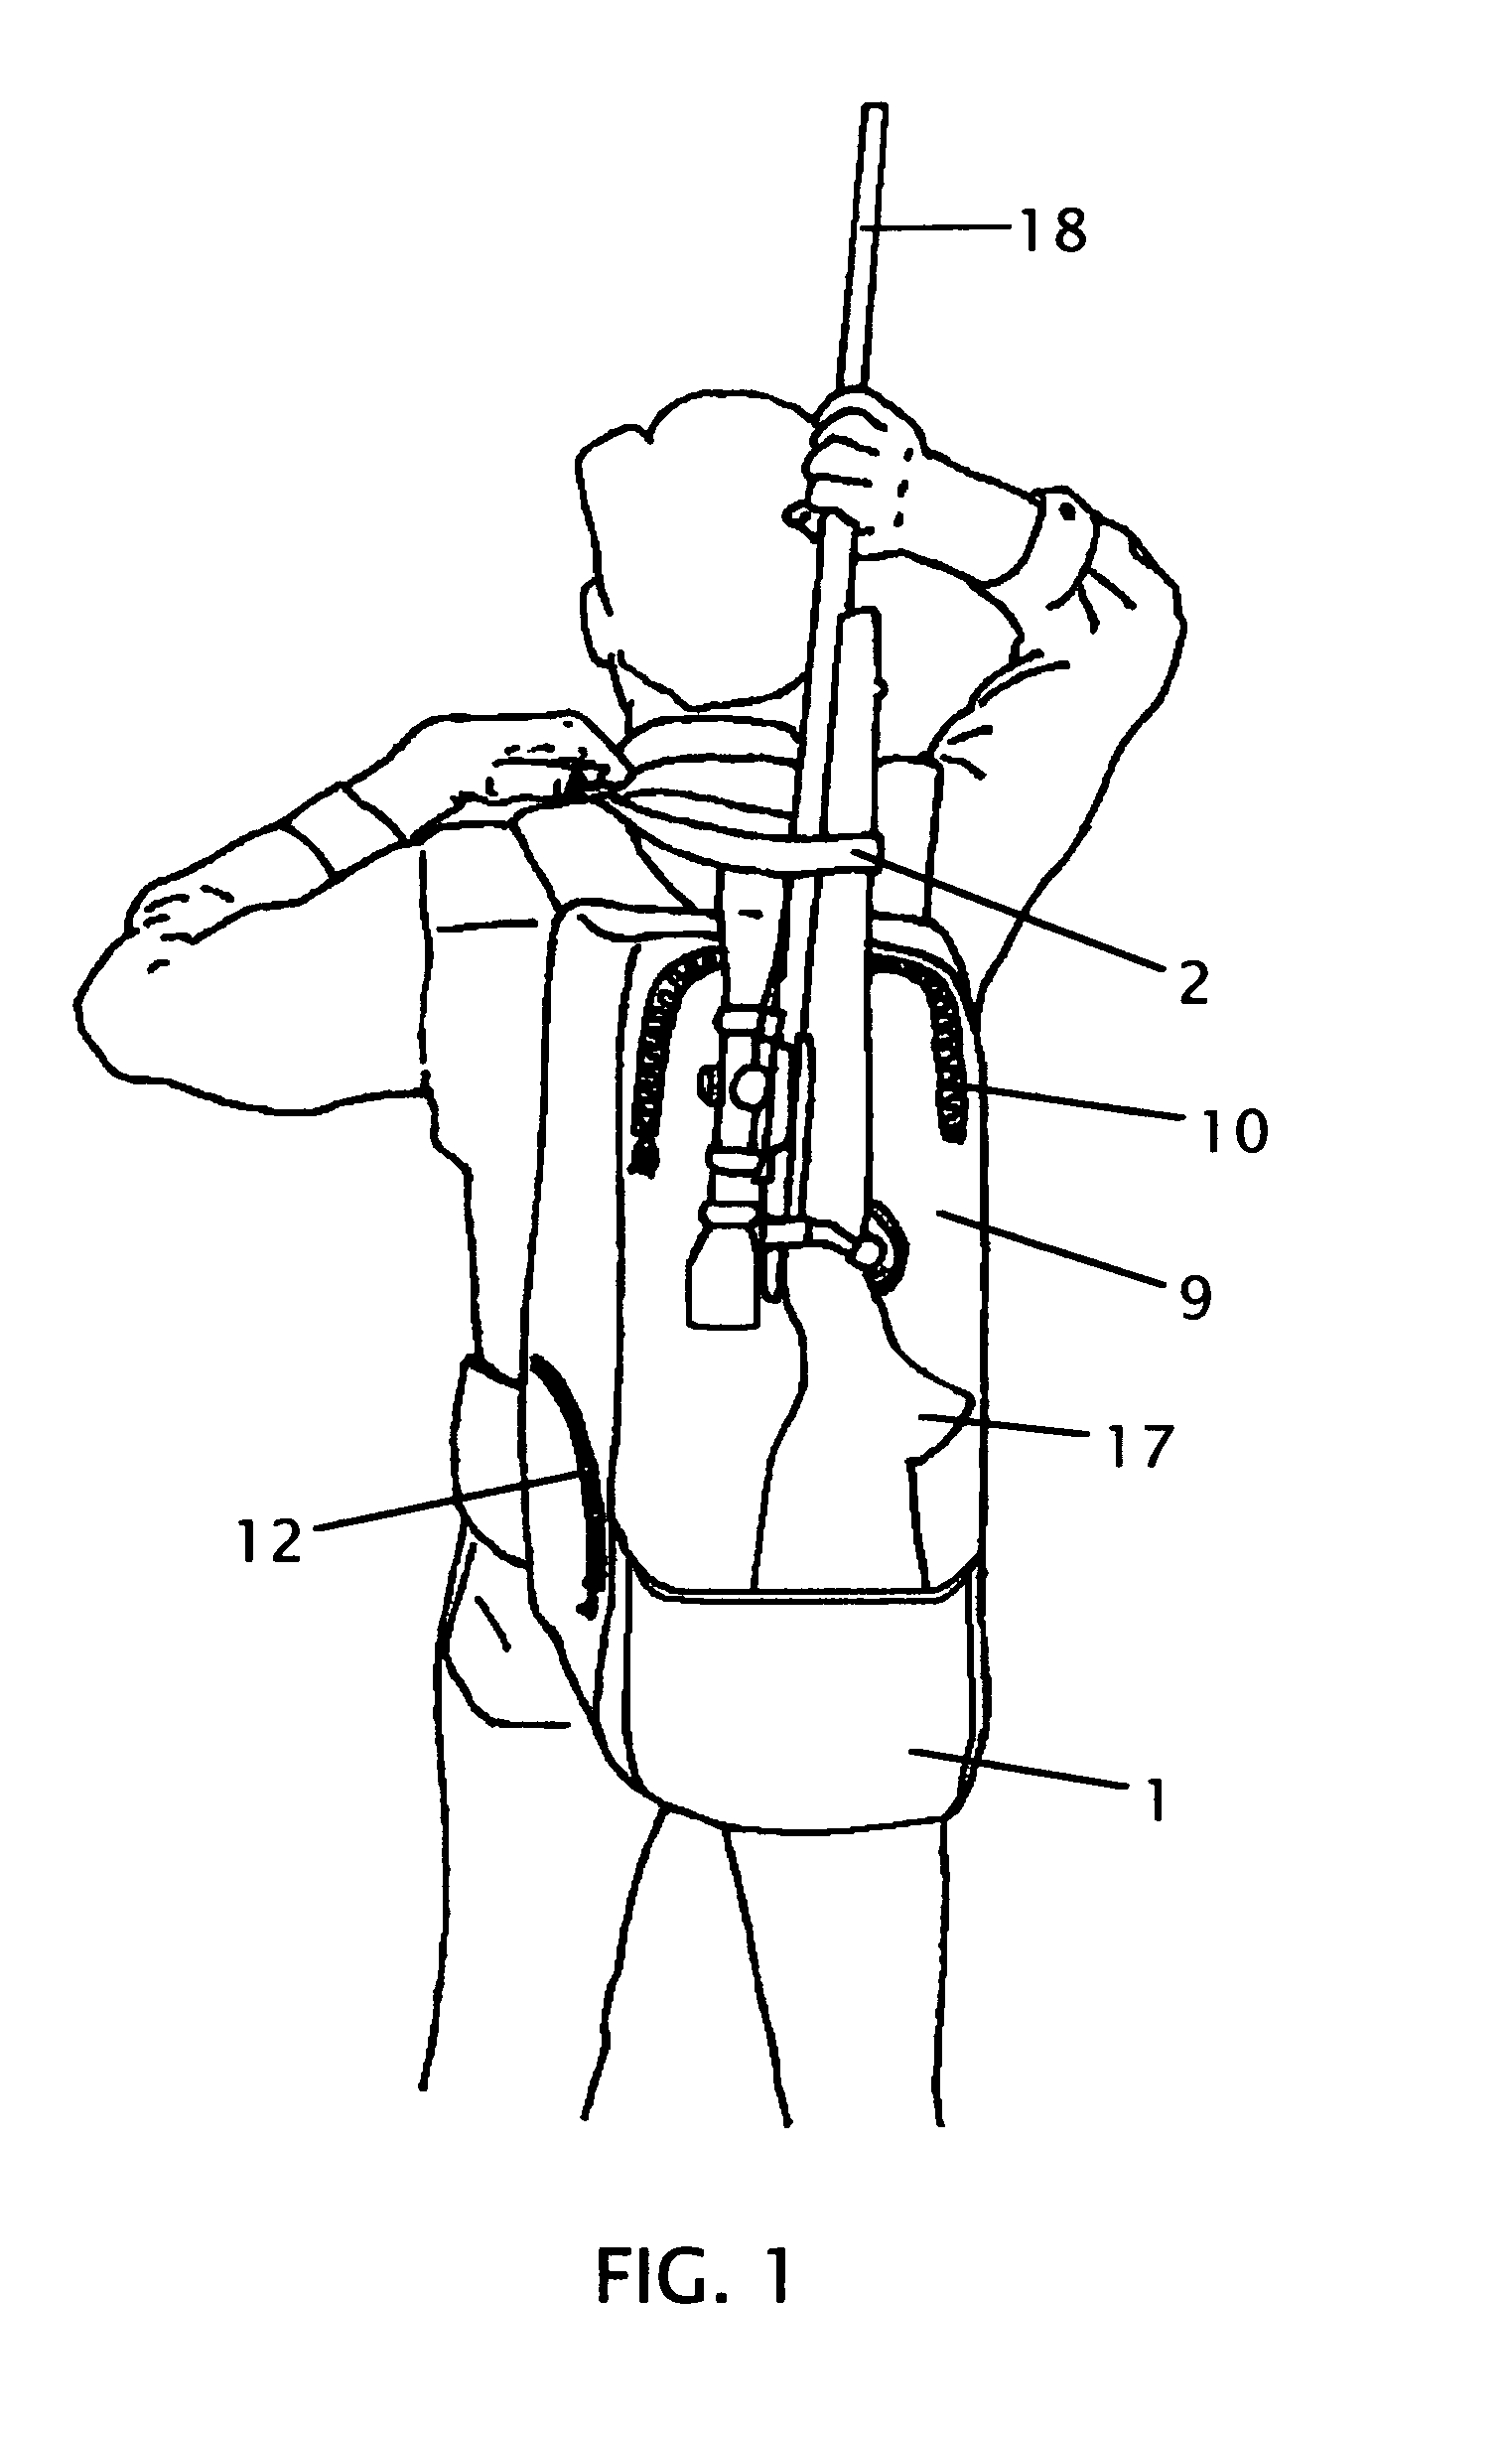 Backpack for carrying weapons